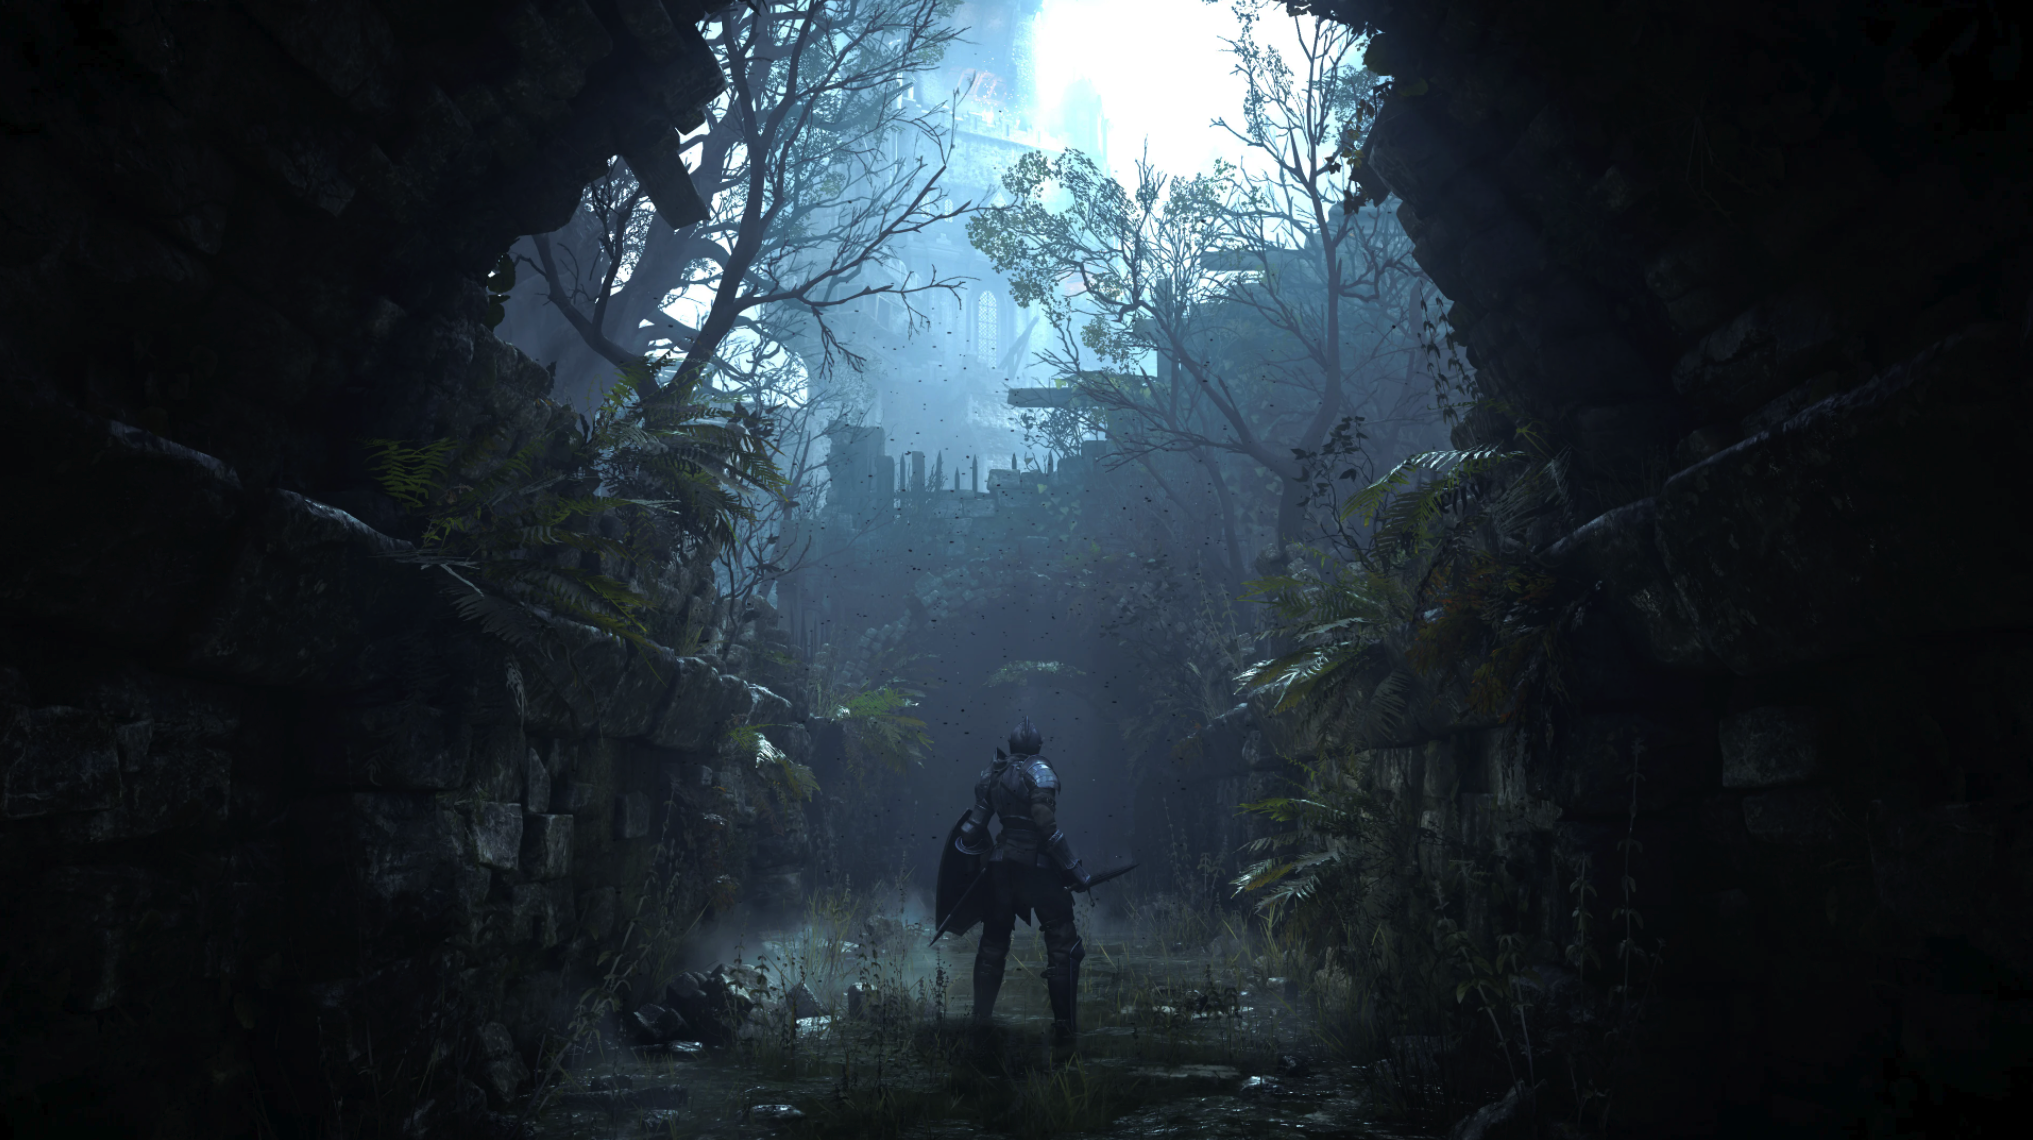 The player exiting a cave and seeing the overgrown landscape